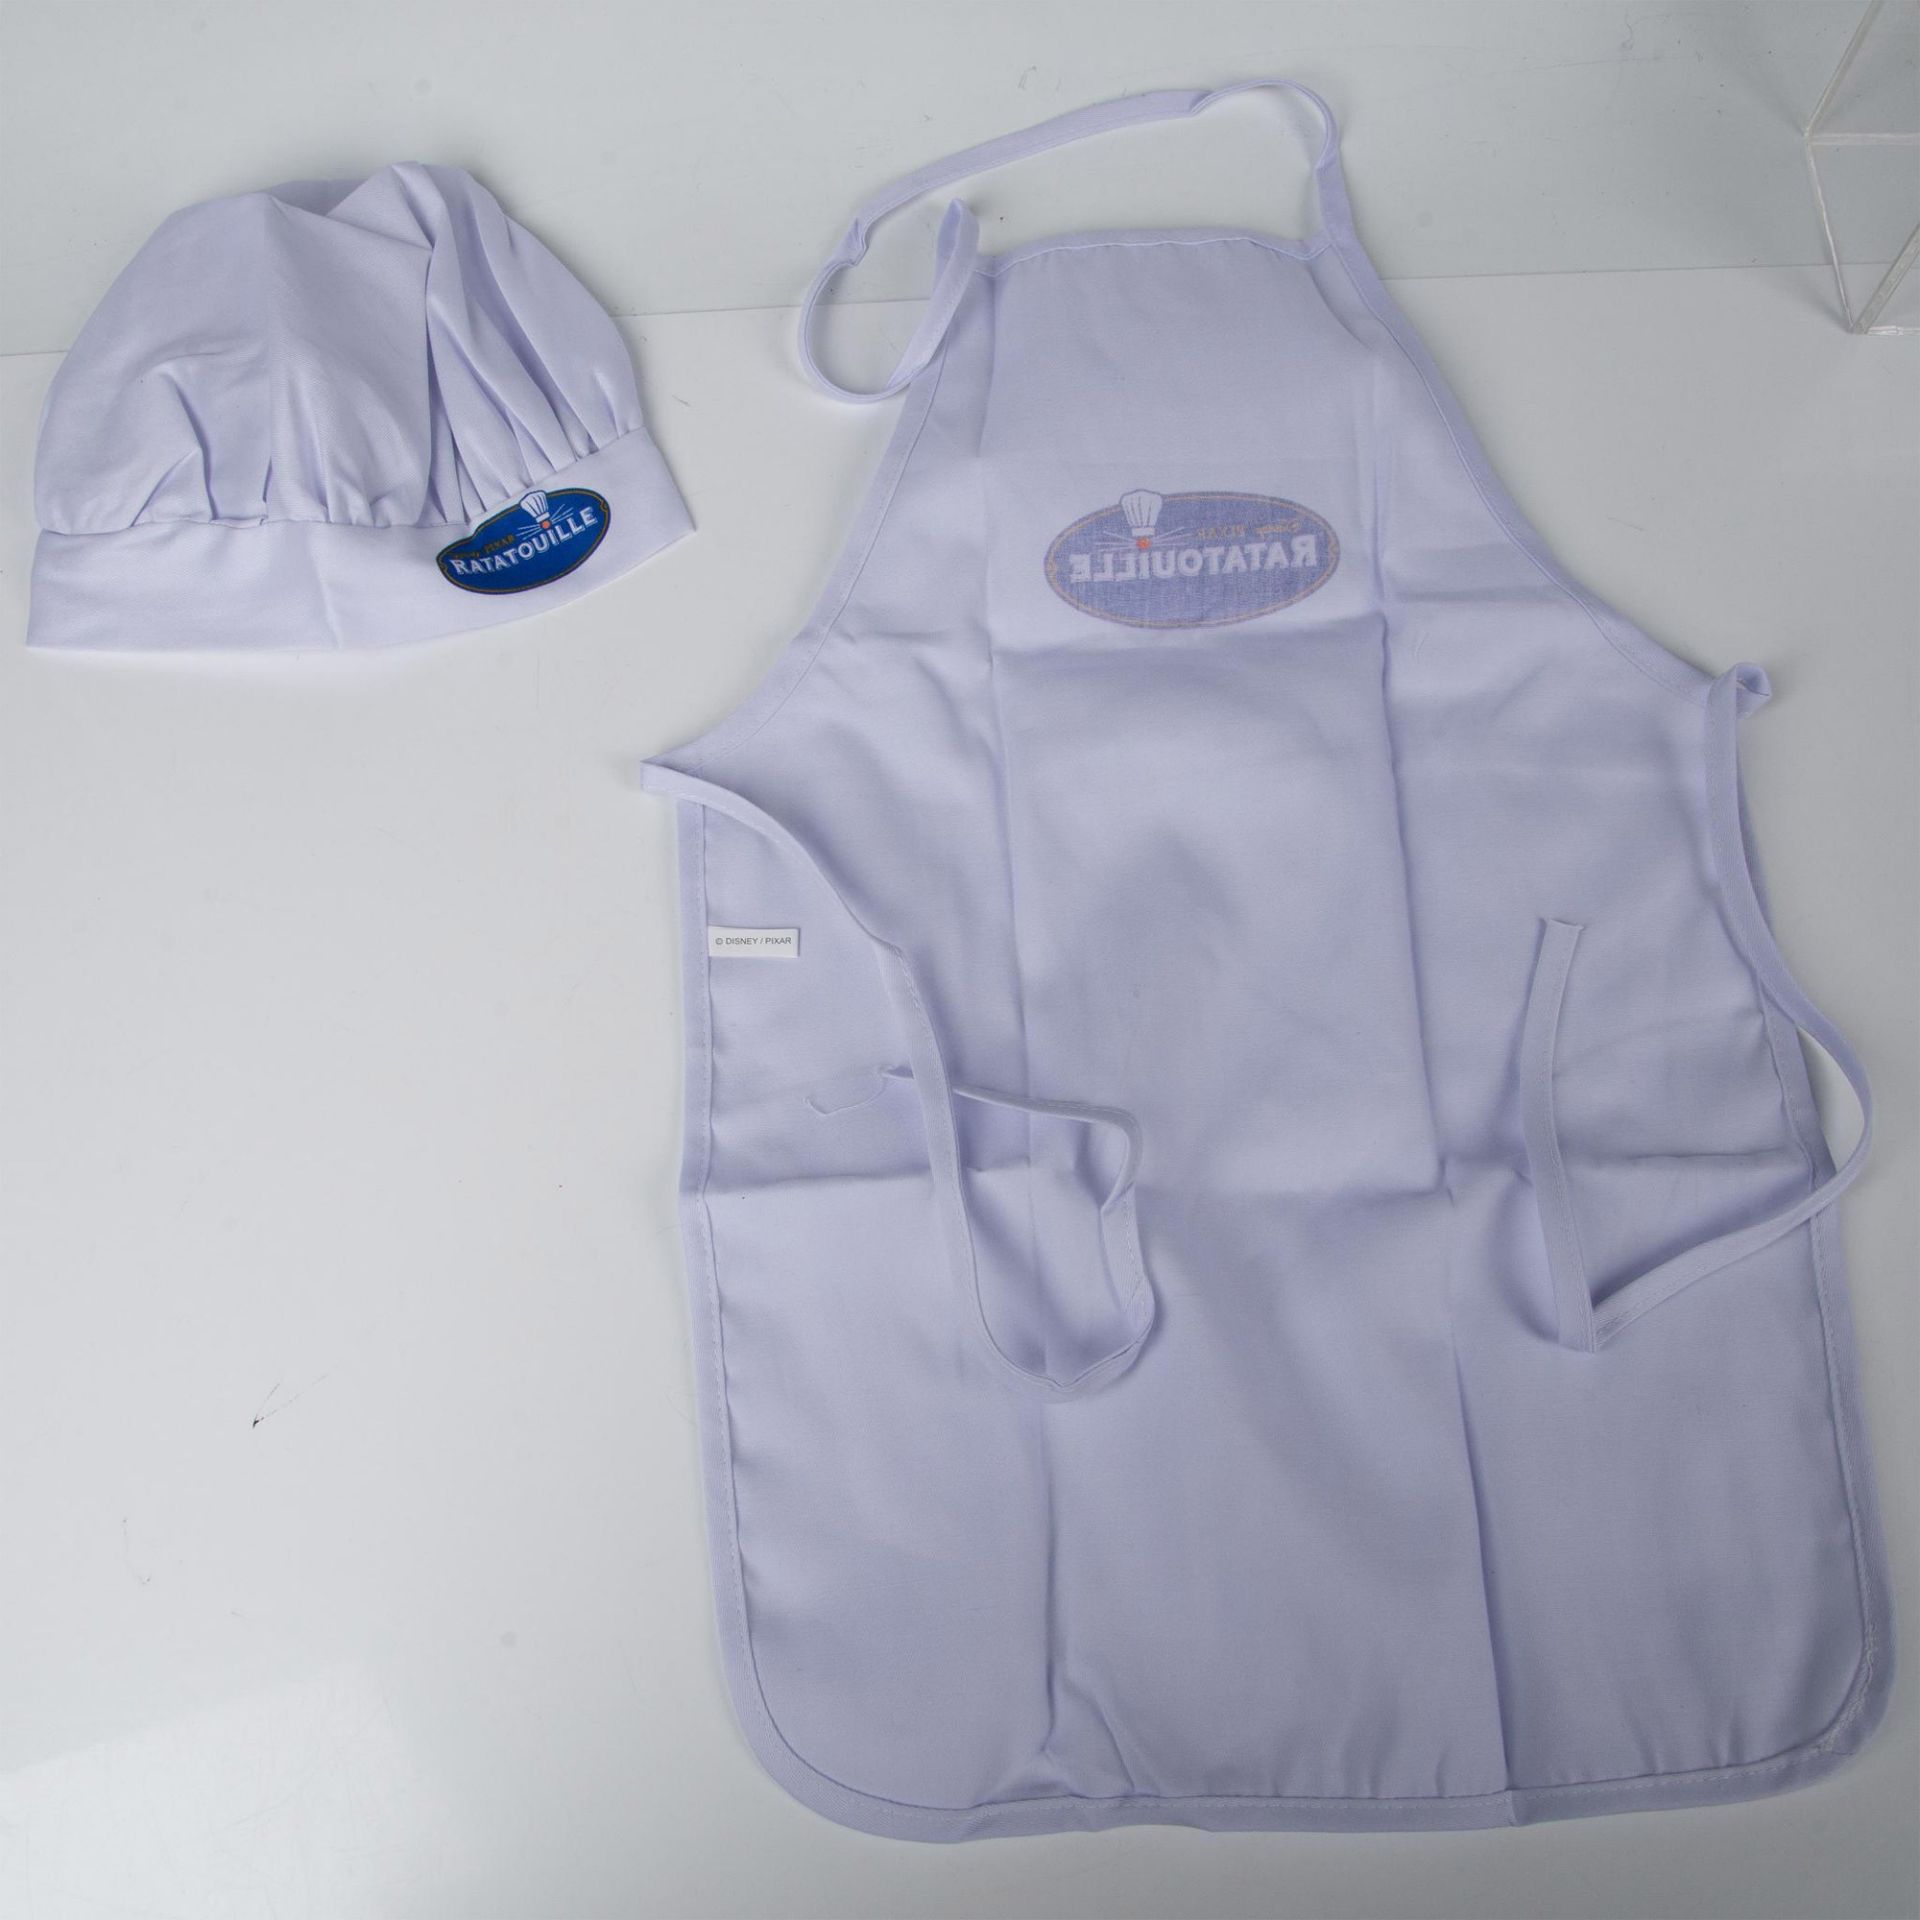 Adorable Disney Pixar Ratatouille Youth Apron and Chef's Hat - Image 5 of 7